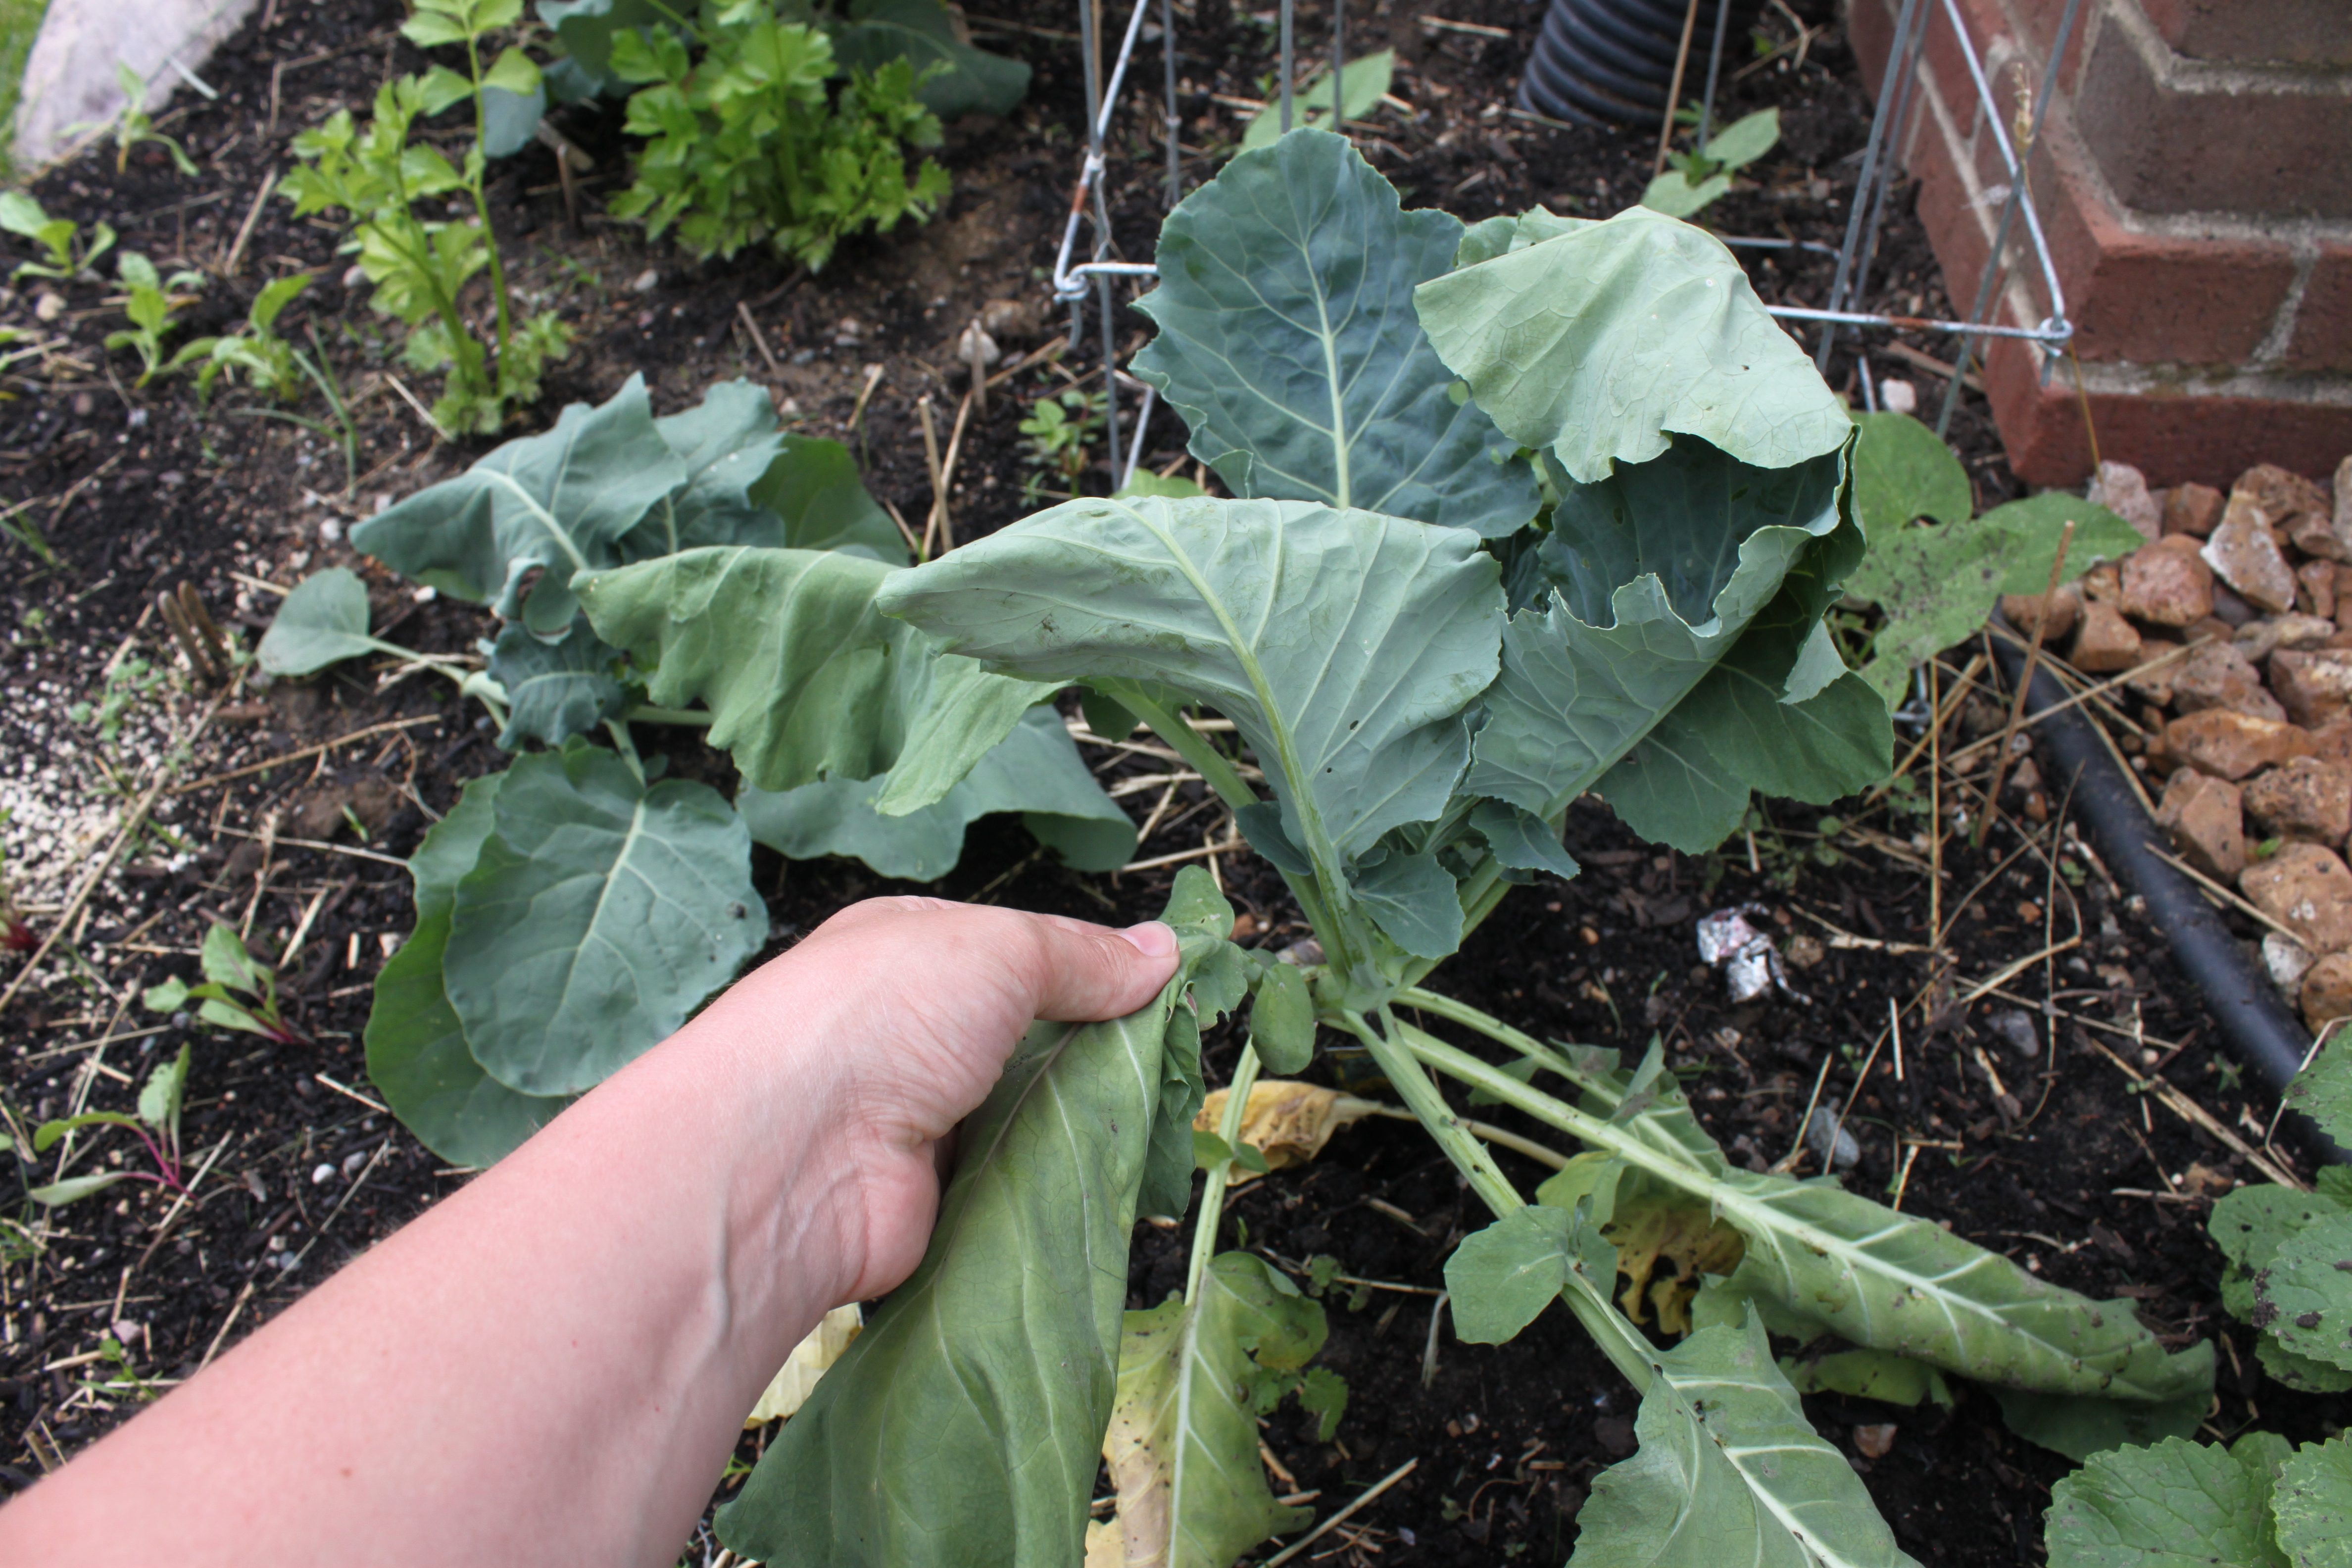 Wilting Collards caused by Cabbage Root Maggot